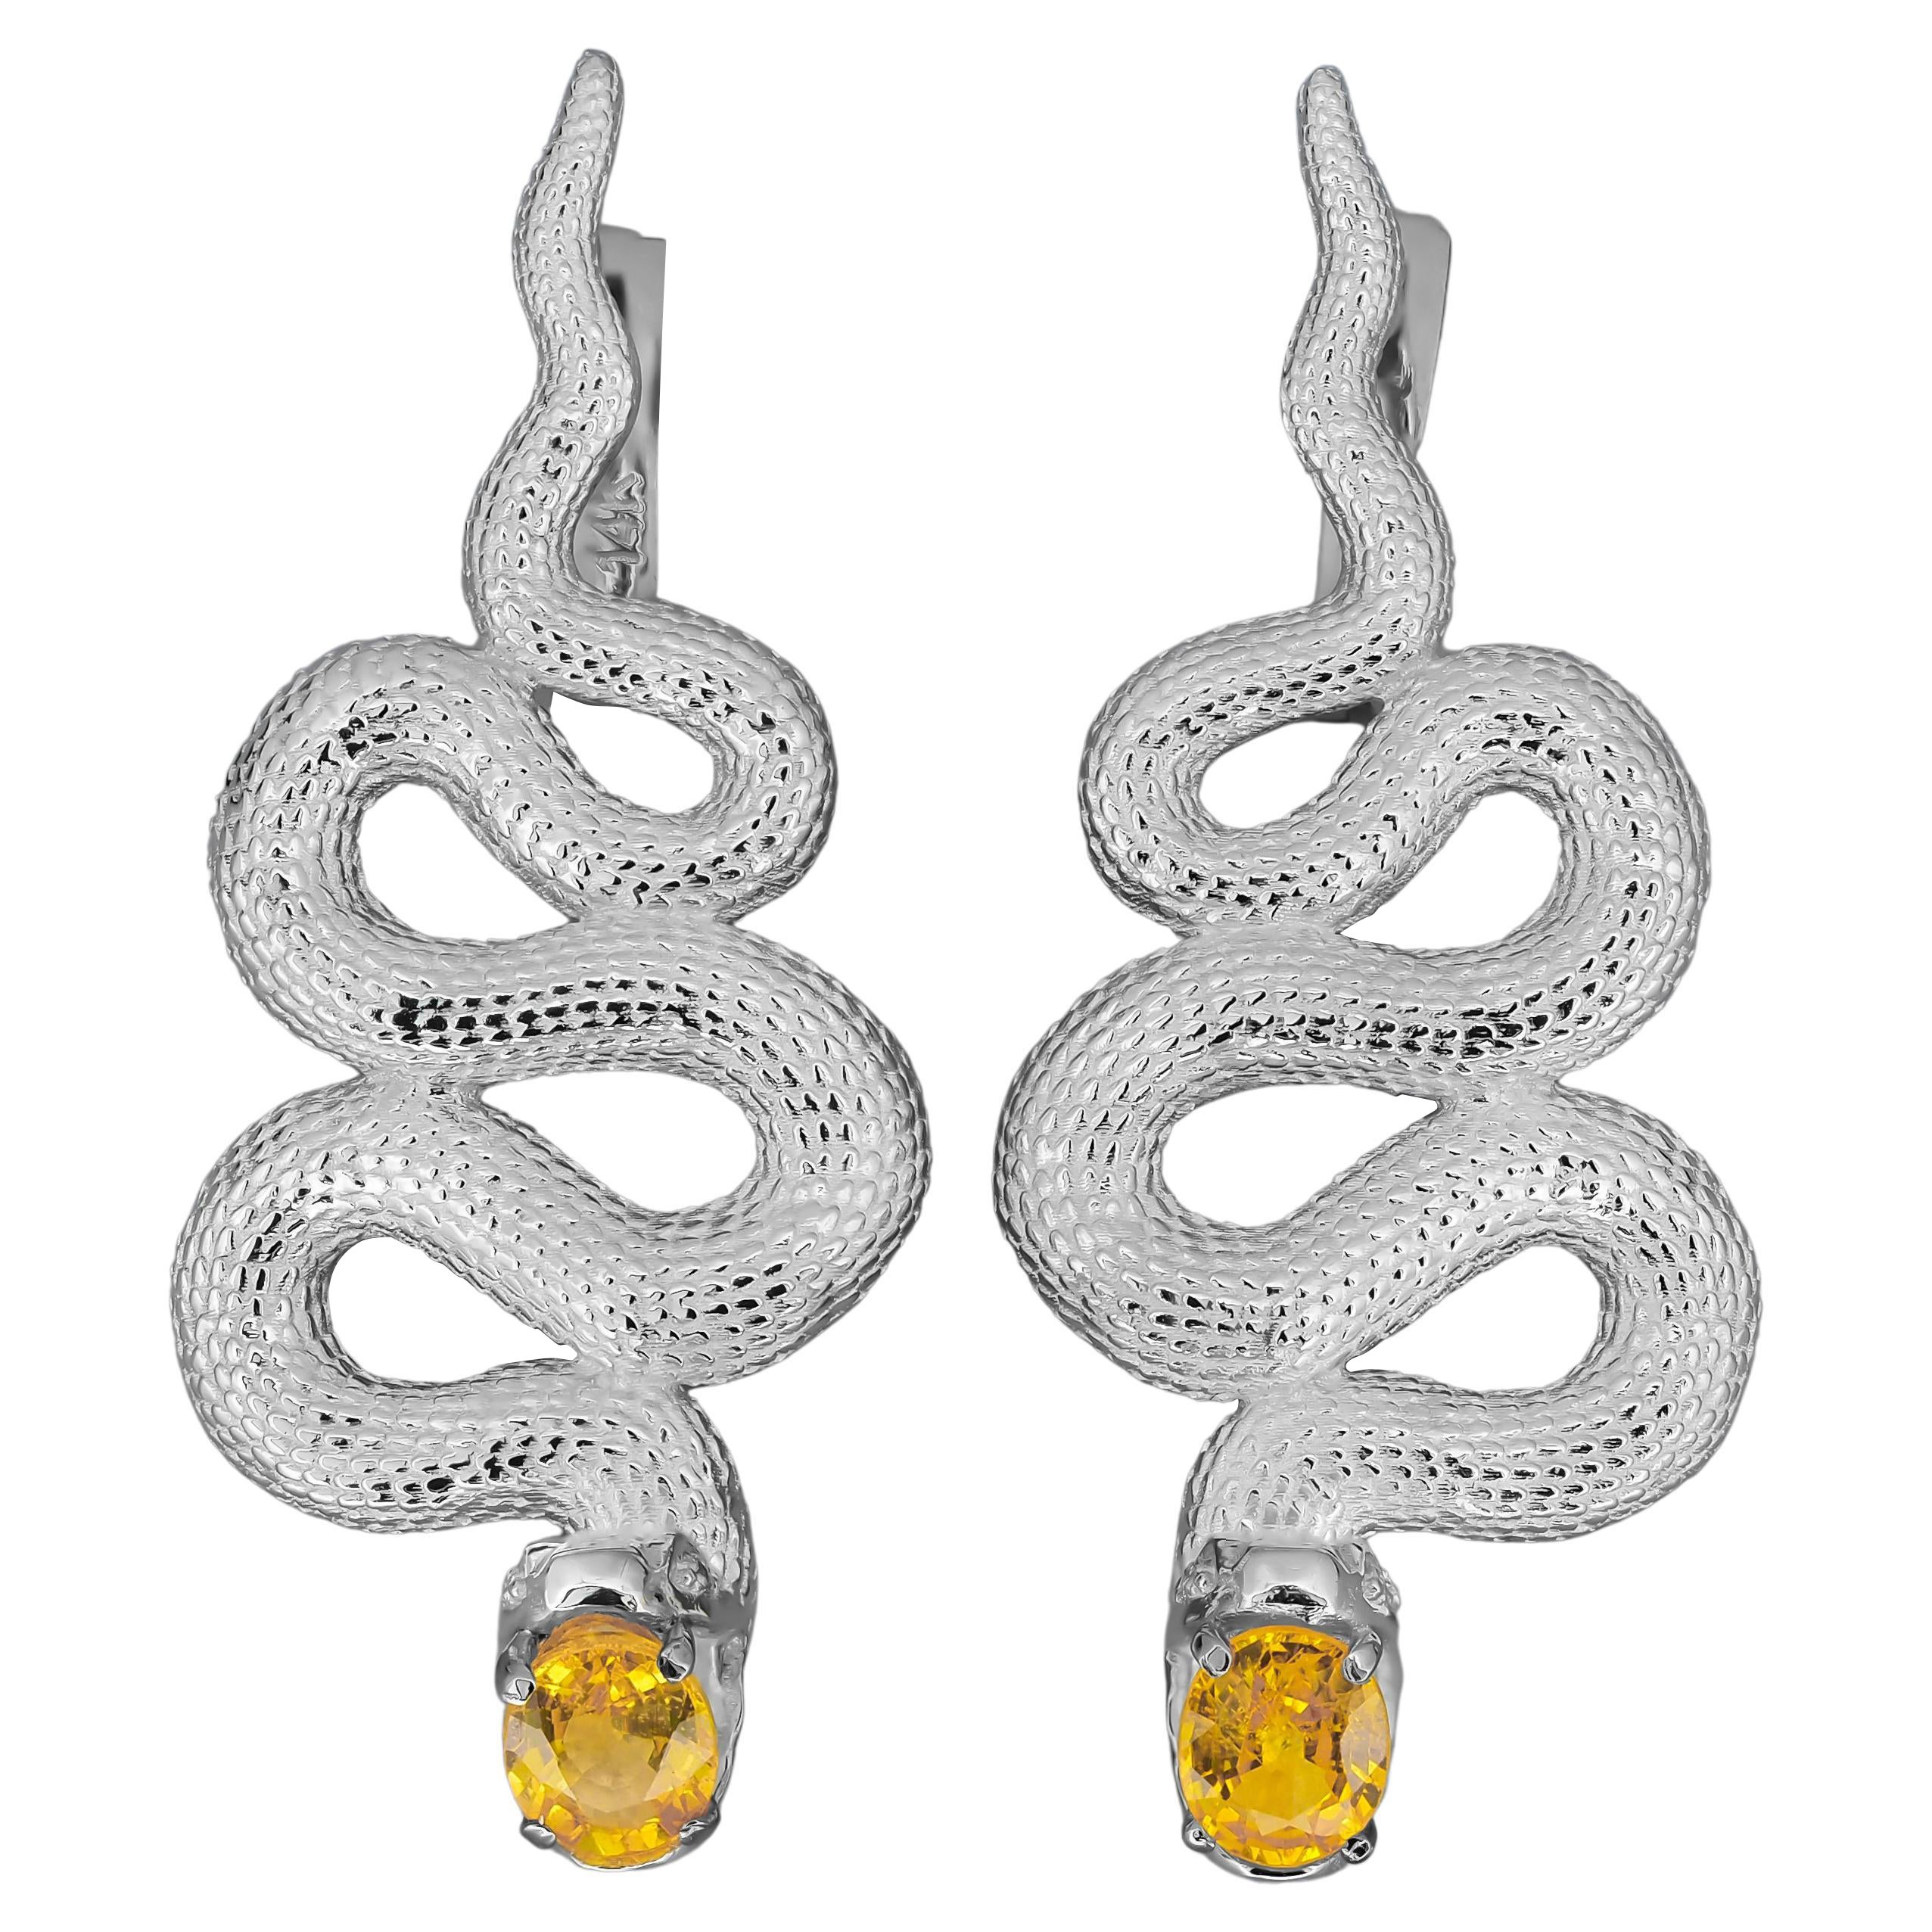 Massive Snake Earrings with Sapphires